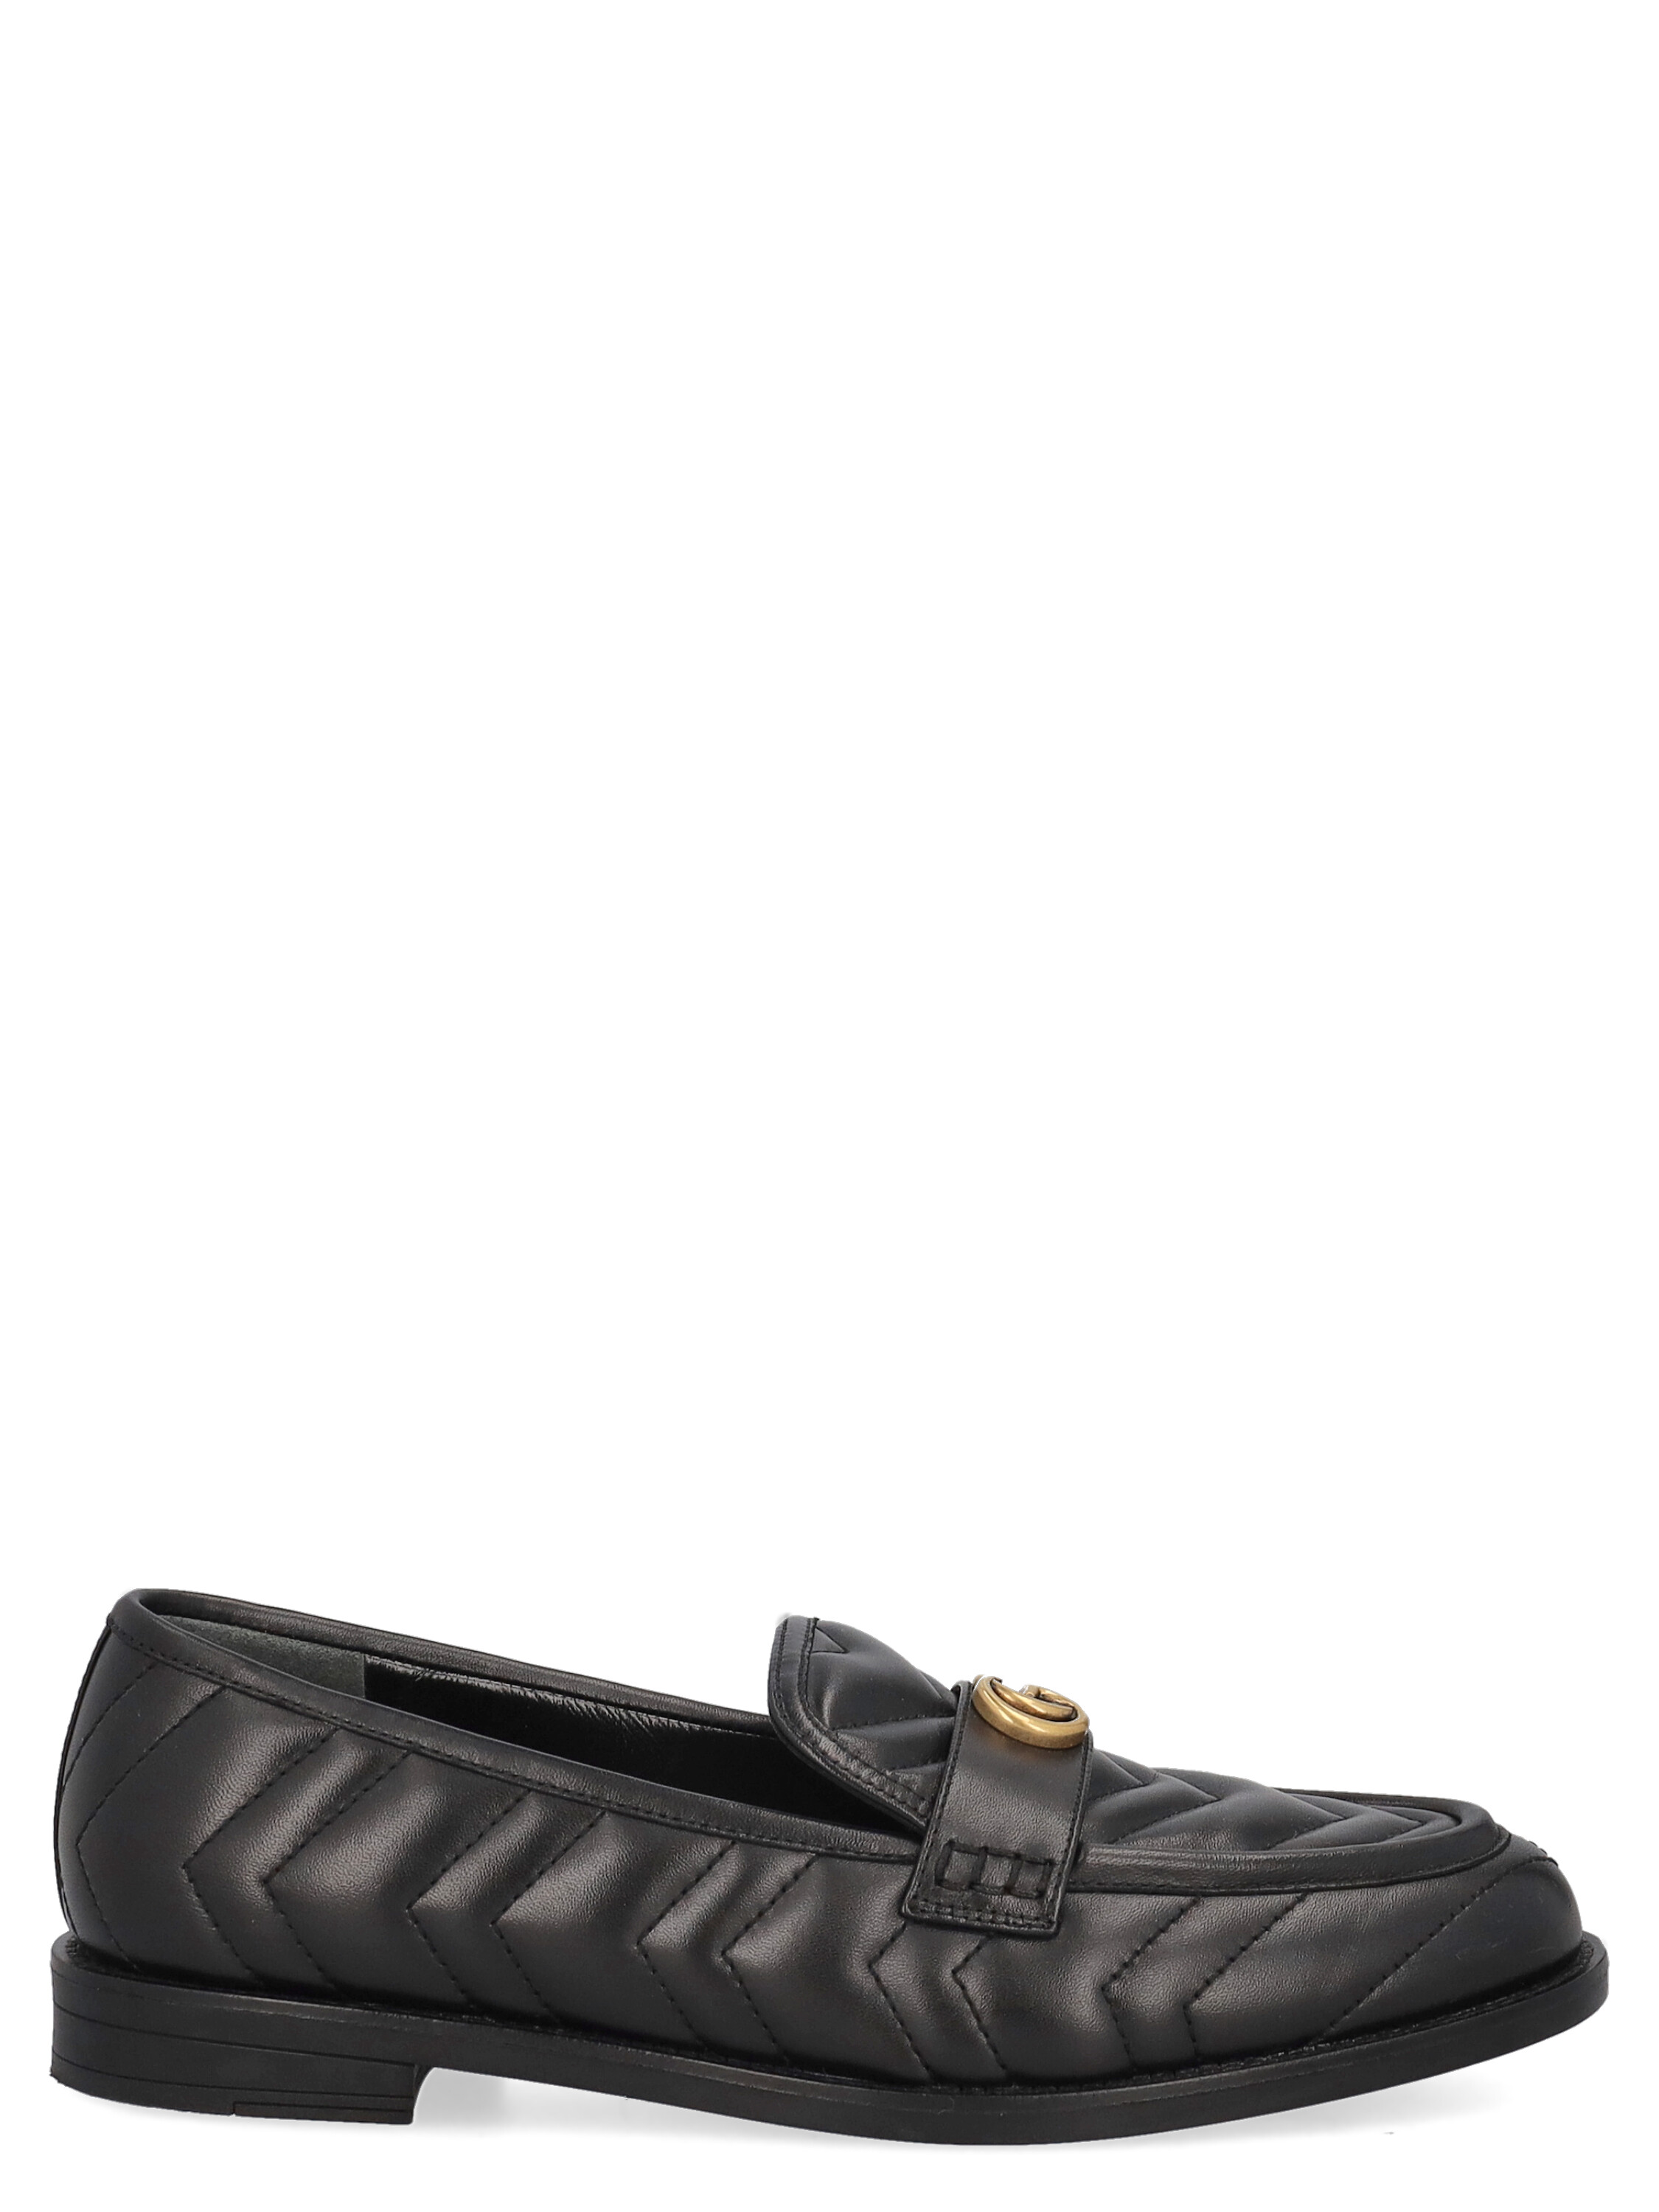 Pre-owned Gucci Women's Loafers -  - In Black It 40.5